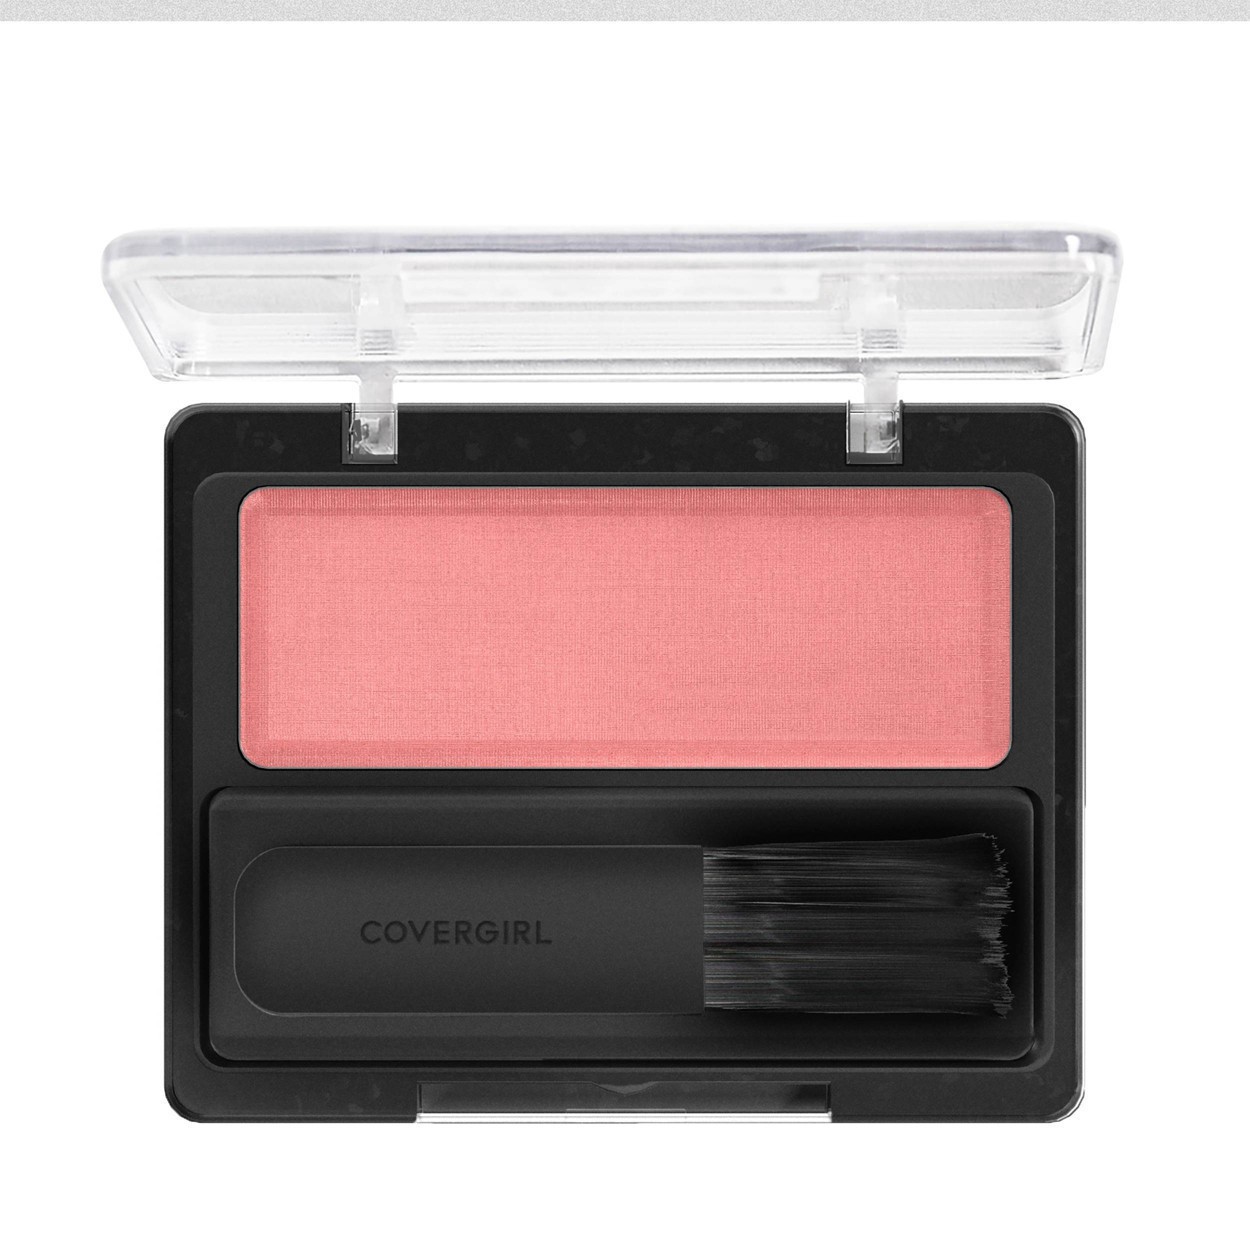 slide 23 of 42, Covergirl COVERGIRL Classic Color Blush Rose Silk, 1 ct